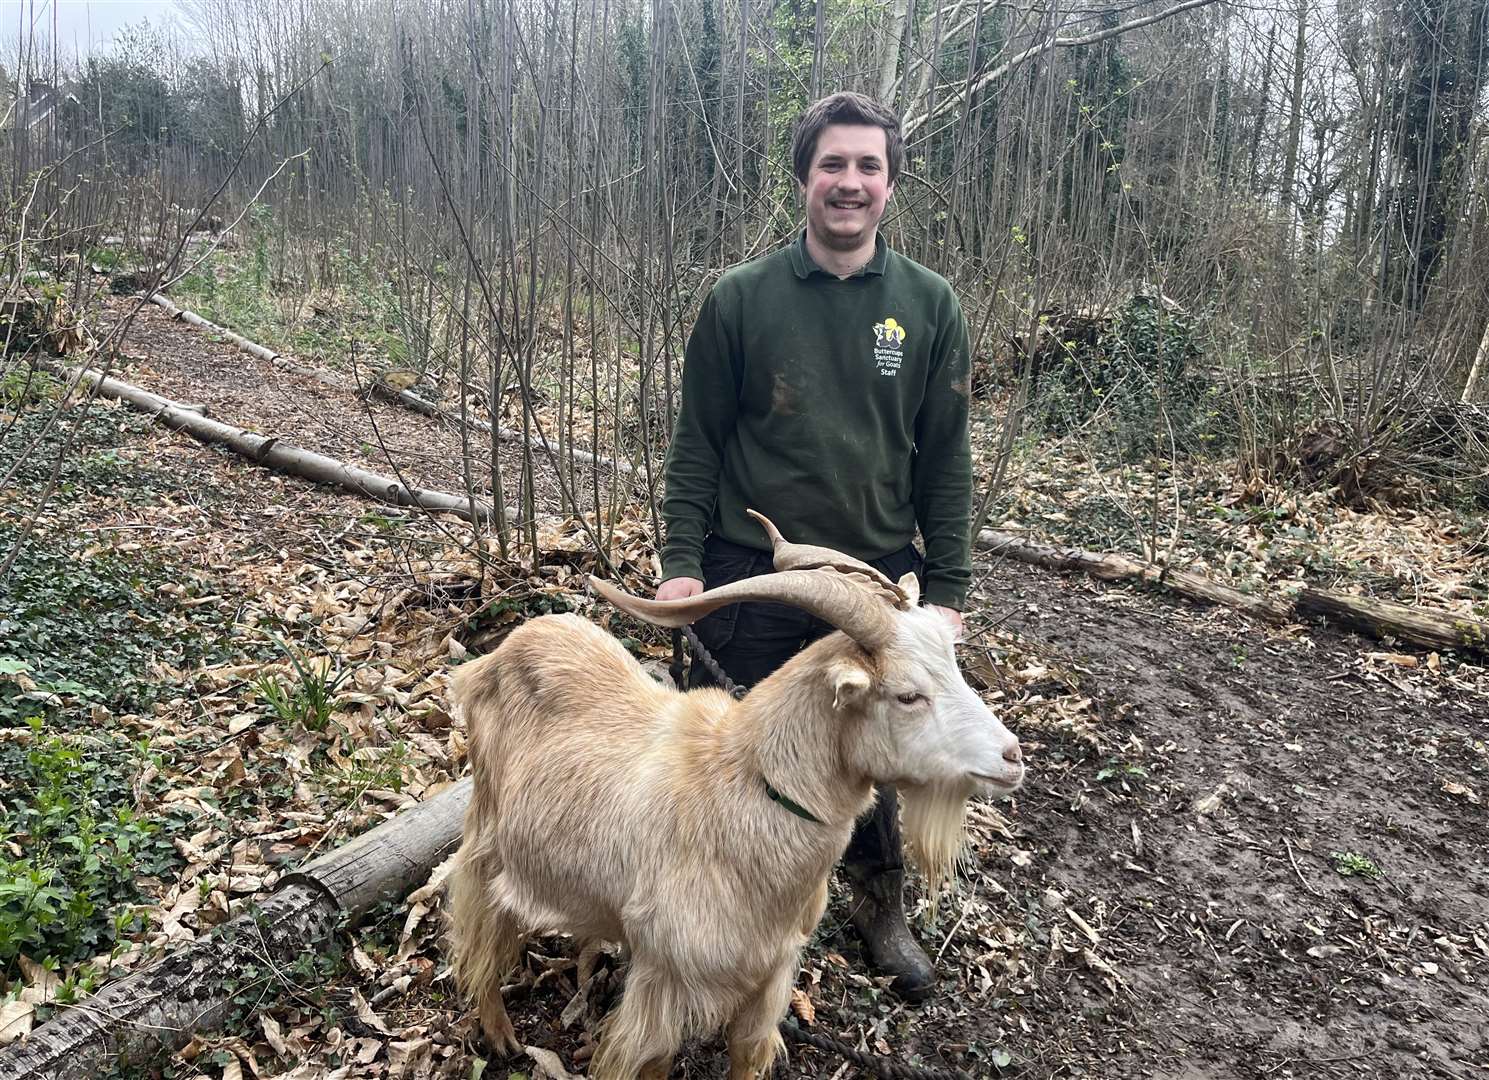 Ben is the head of hoofstock at Buttercups Sanctuary for Goats